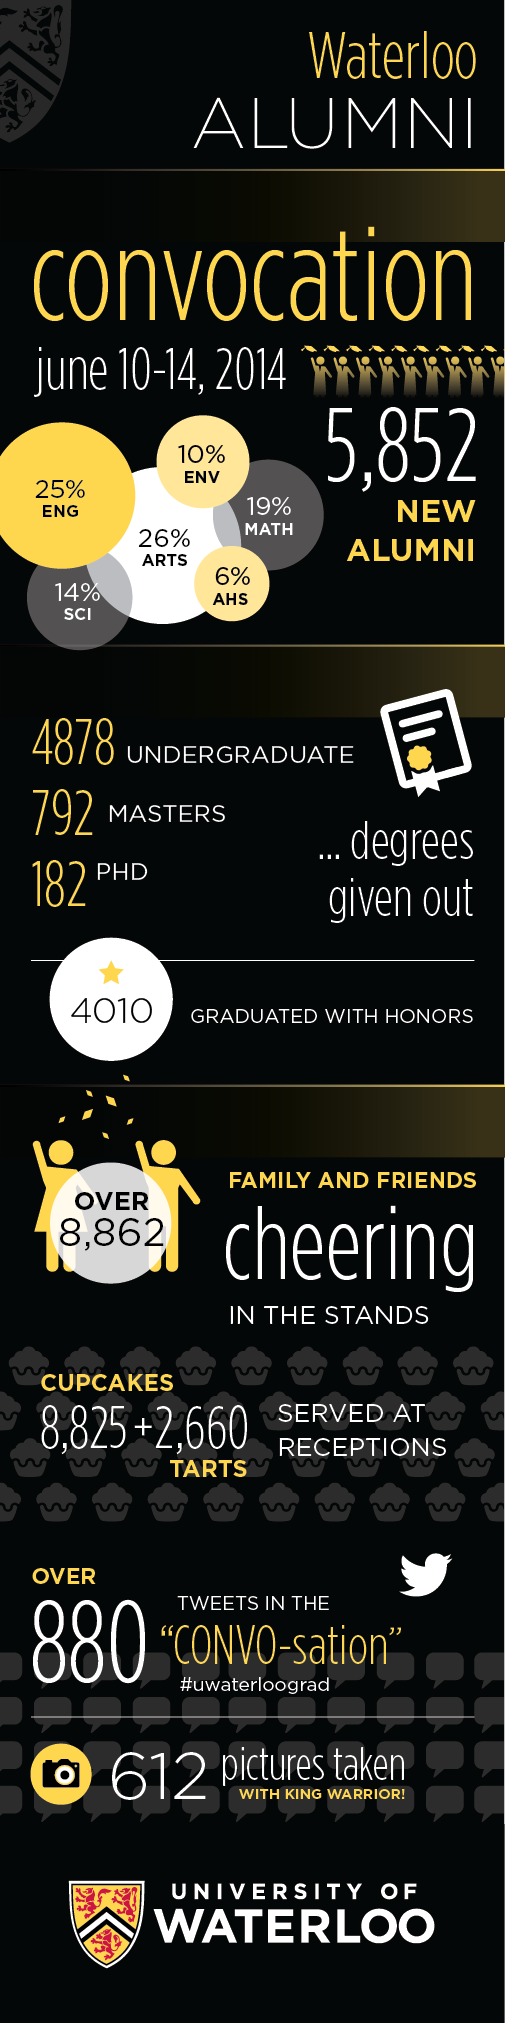 convocation infographic